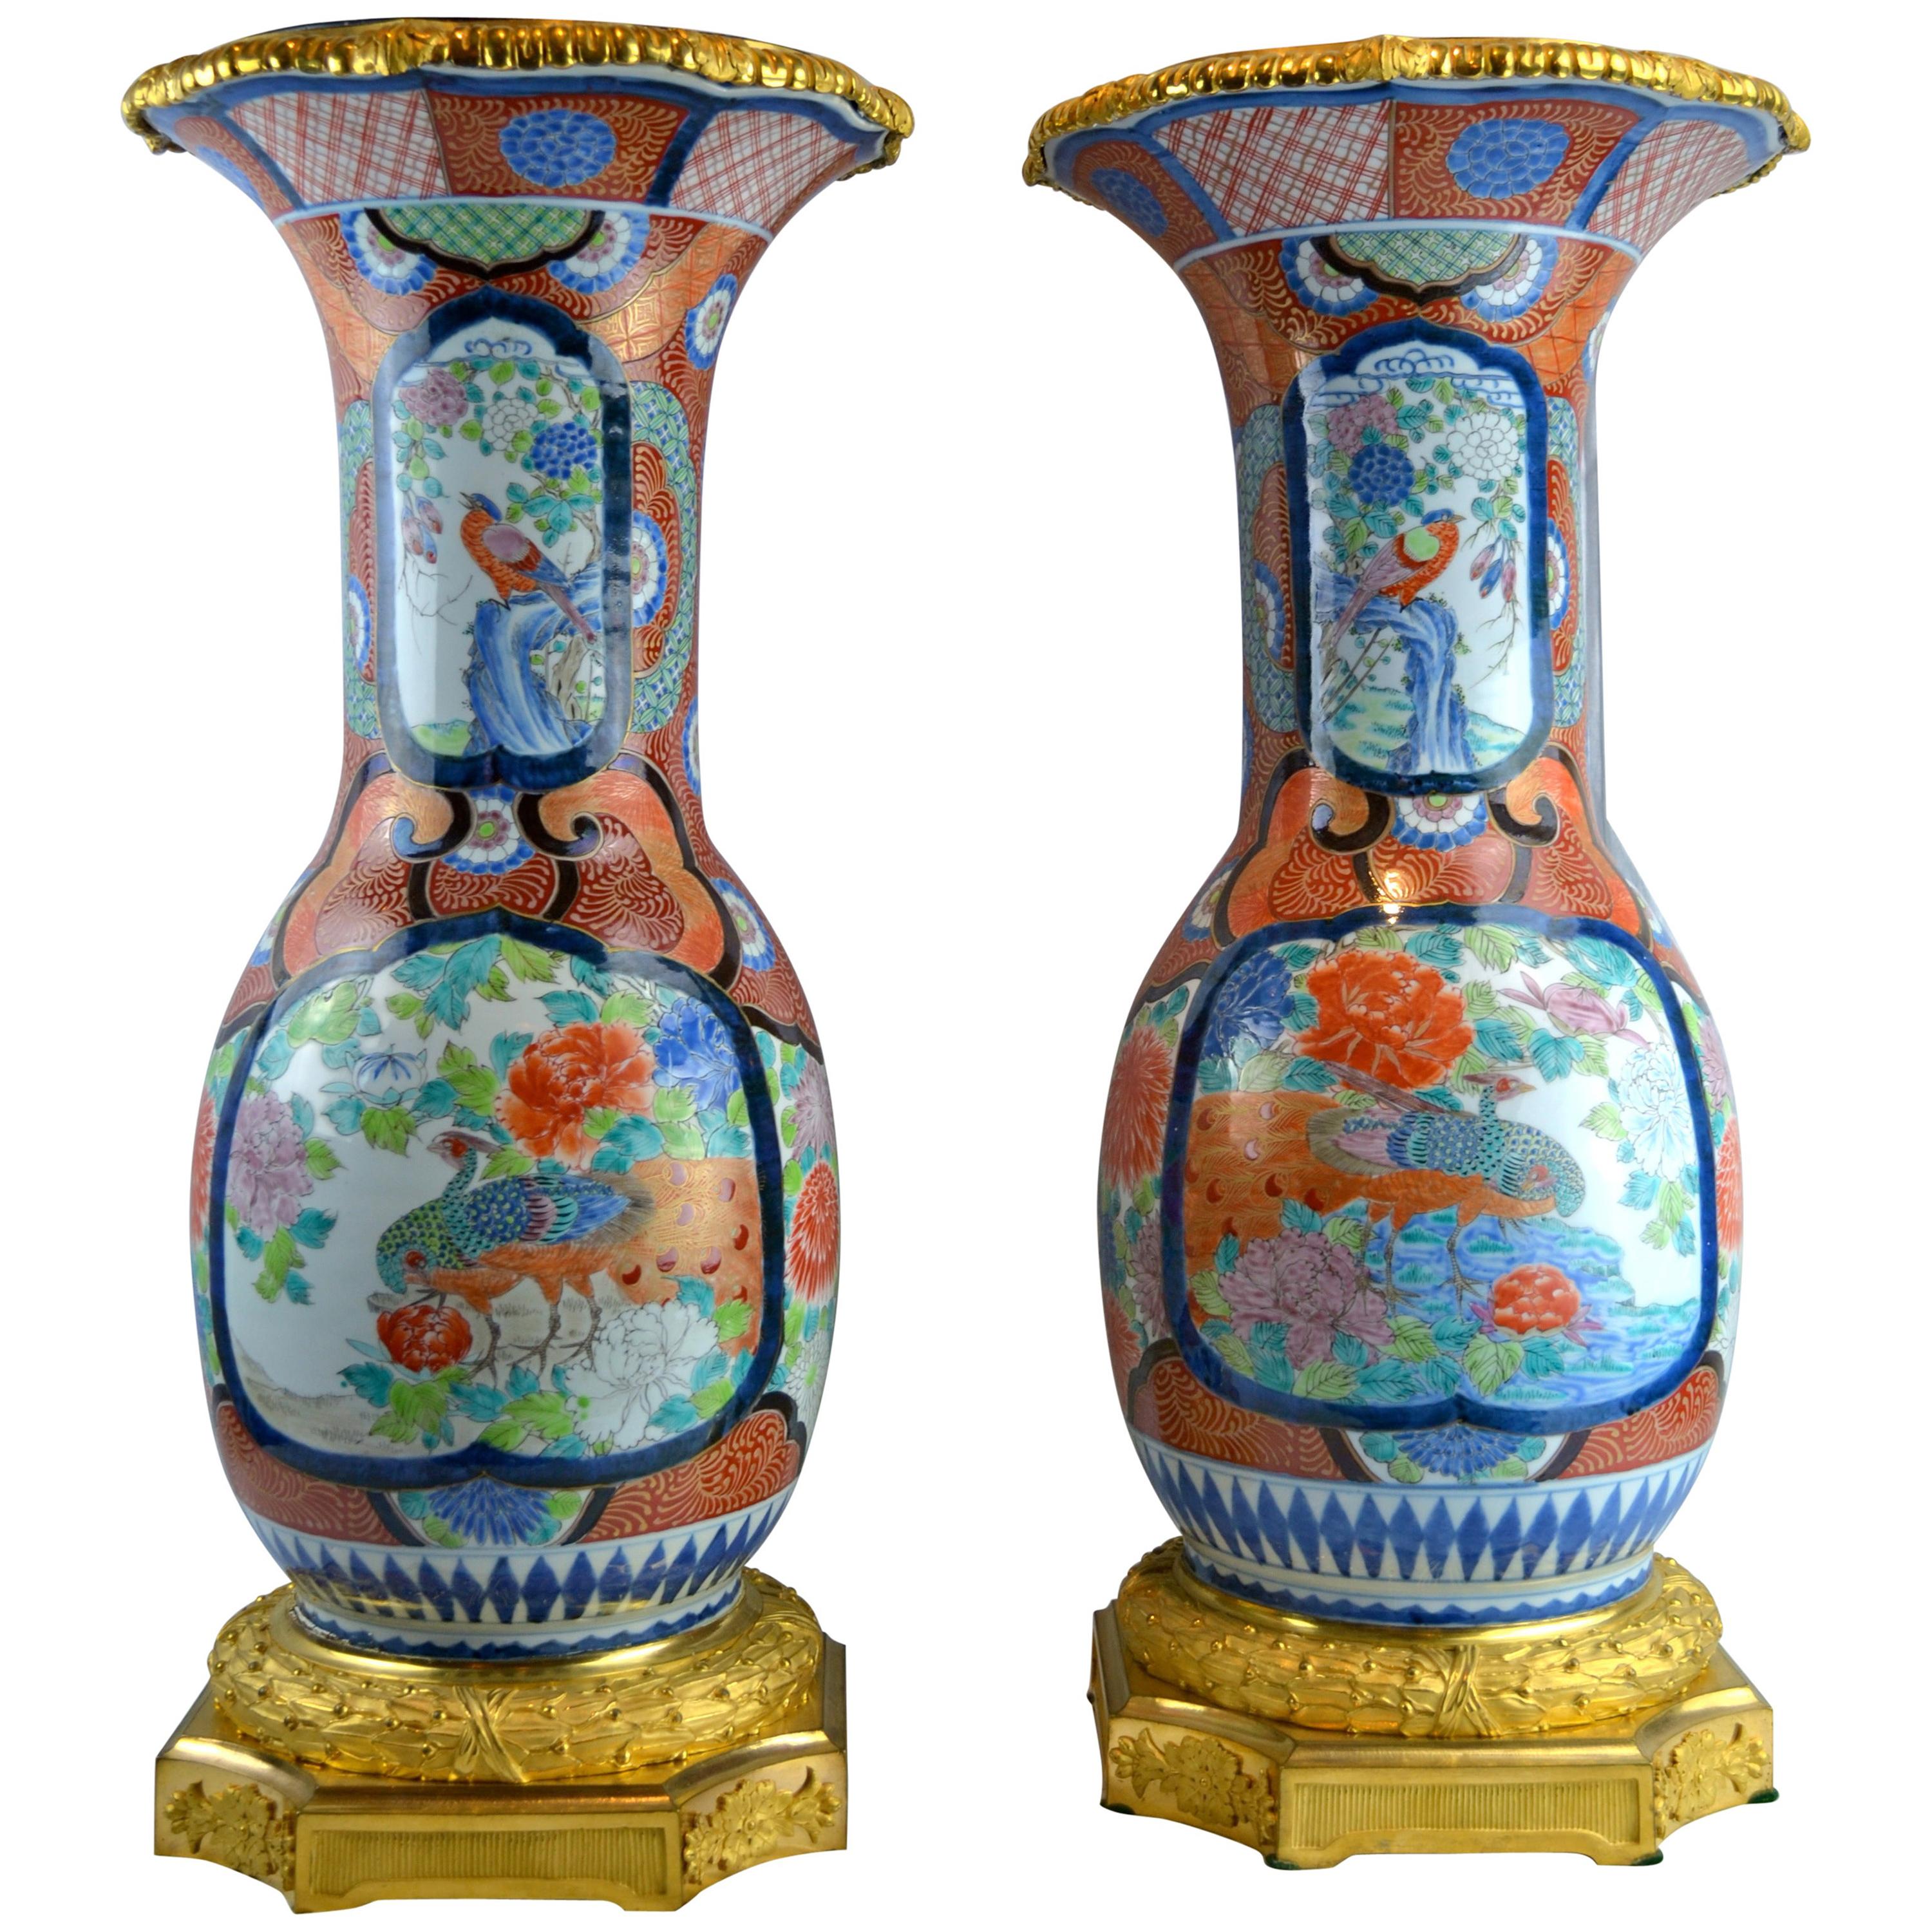 Palatial 19th Century Japanese Imari Vases with French Gilt Bronze Mounts, Pair For Sale